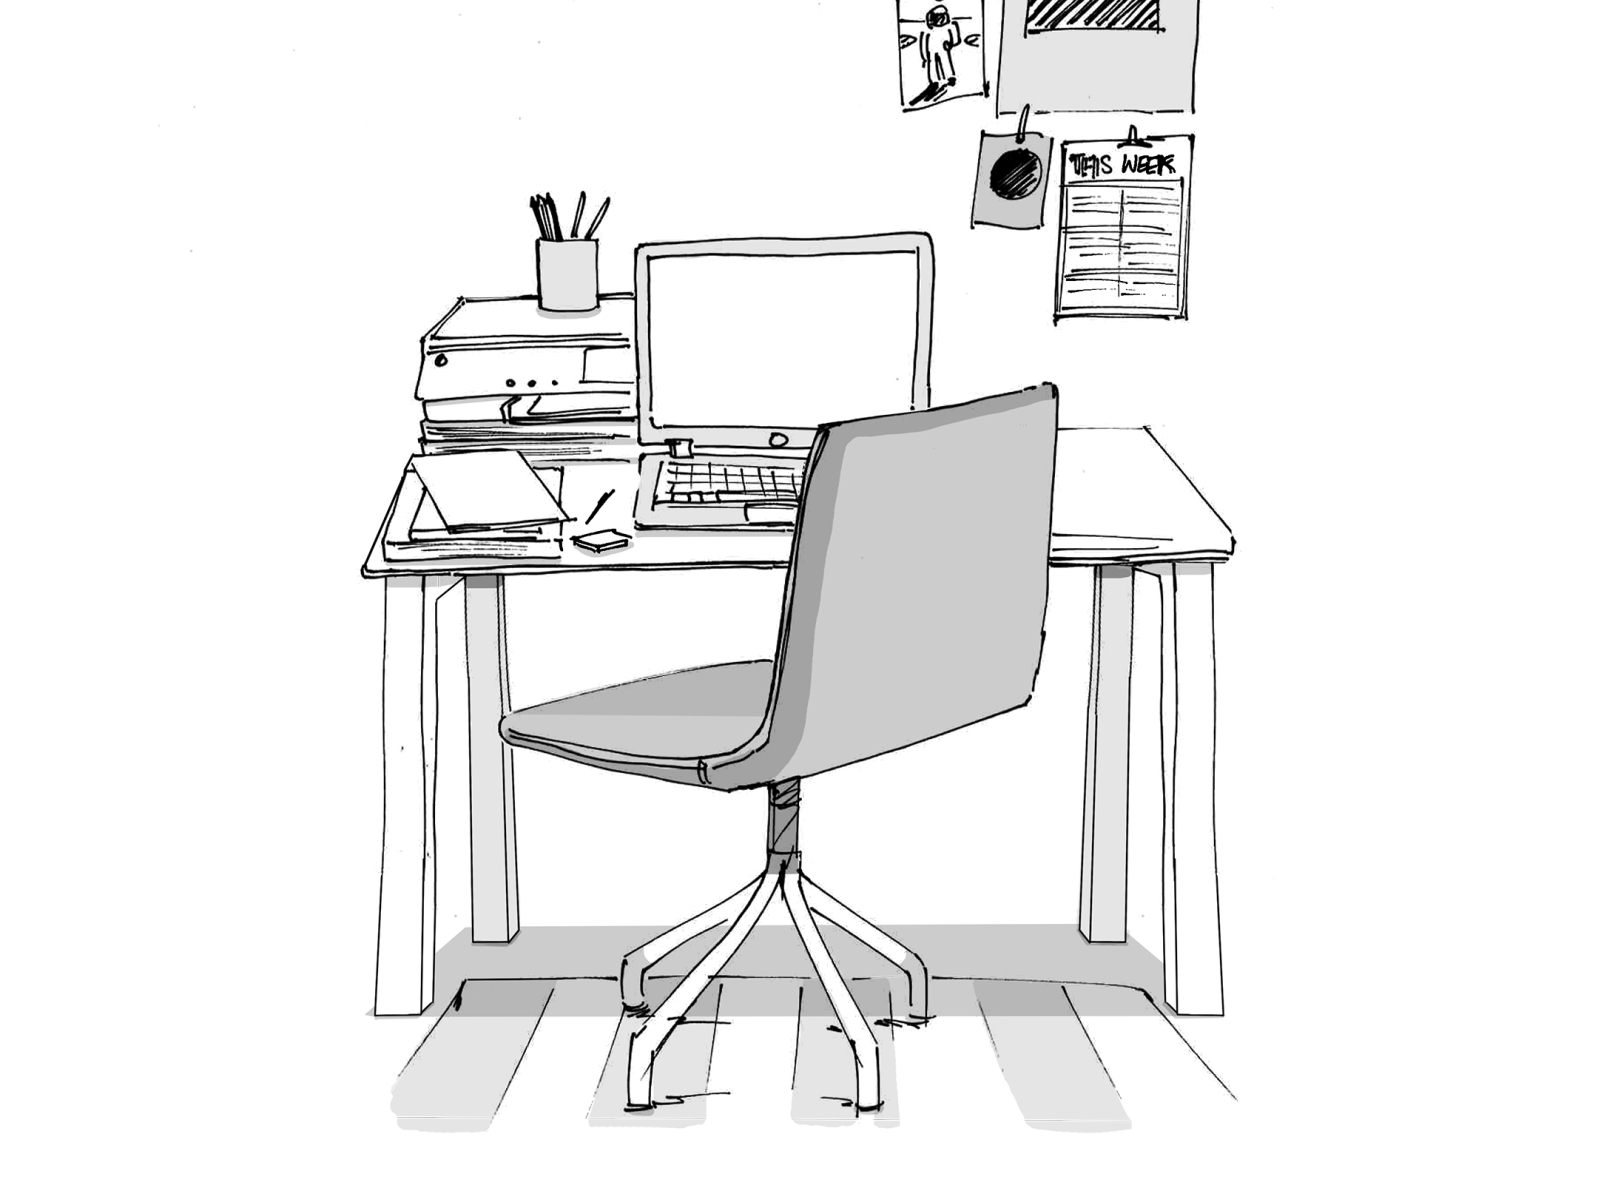 Office desk sketch by Andy Harlow on Dribbble